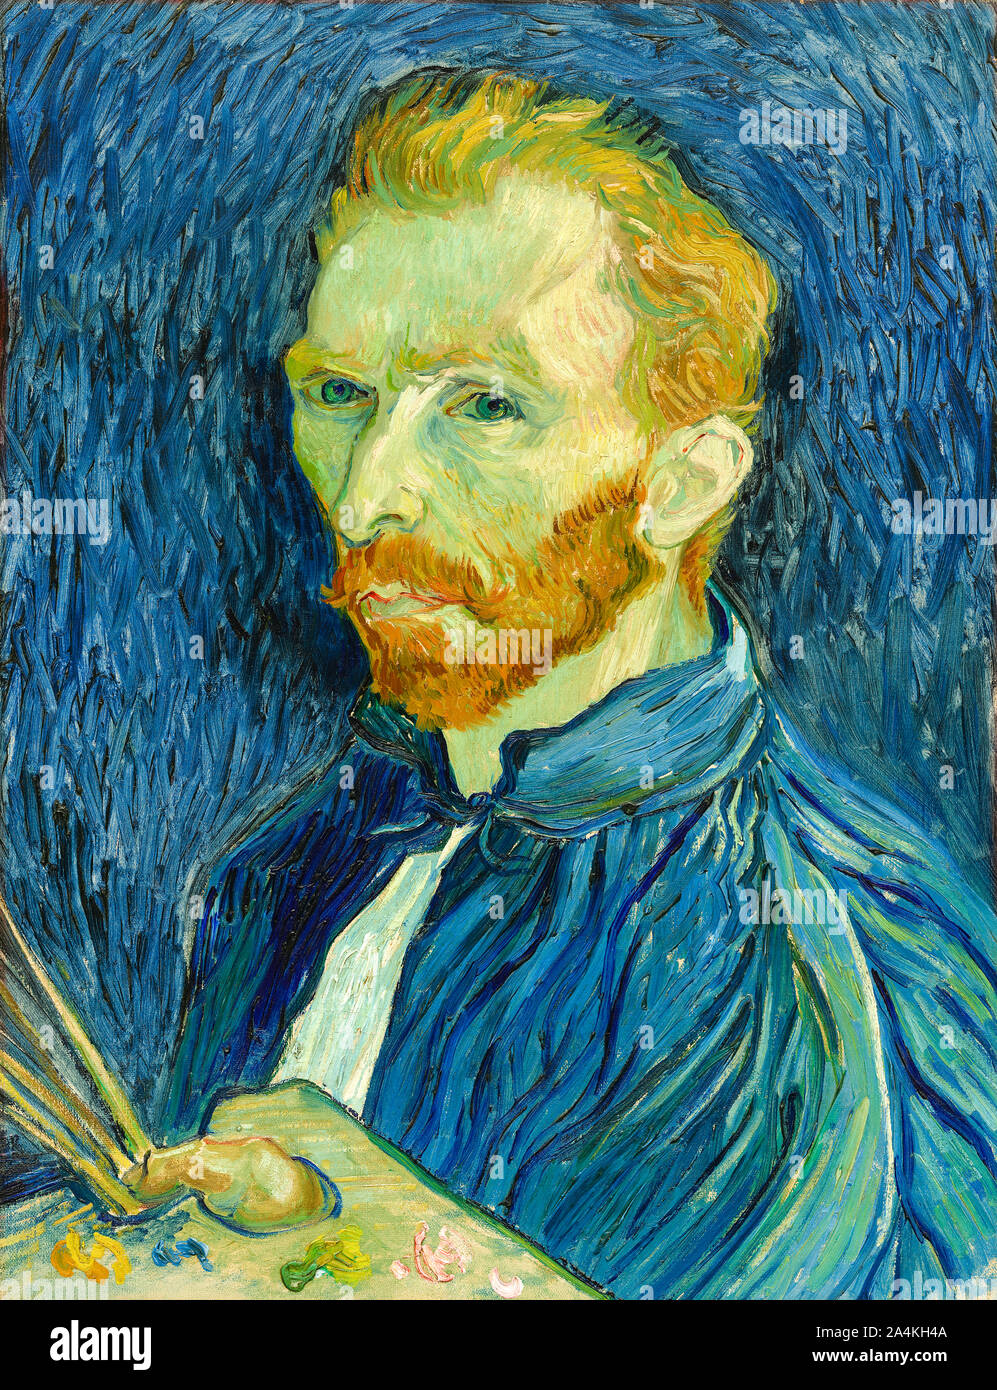 Self-portrait by Vincent van Gogh (1853-1890) Dutch post-impressionist painter painted in the Saint-Paul-de-Mausole asylum near Saint-Rémy in 1889 depicted as an artist. The painting is now in the collection of the National Gallery of Art, Washington, D.C., USA. Stock Photo